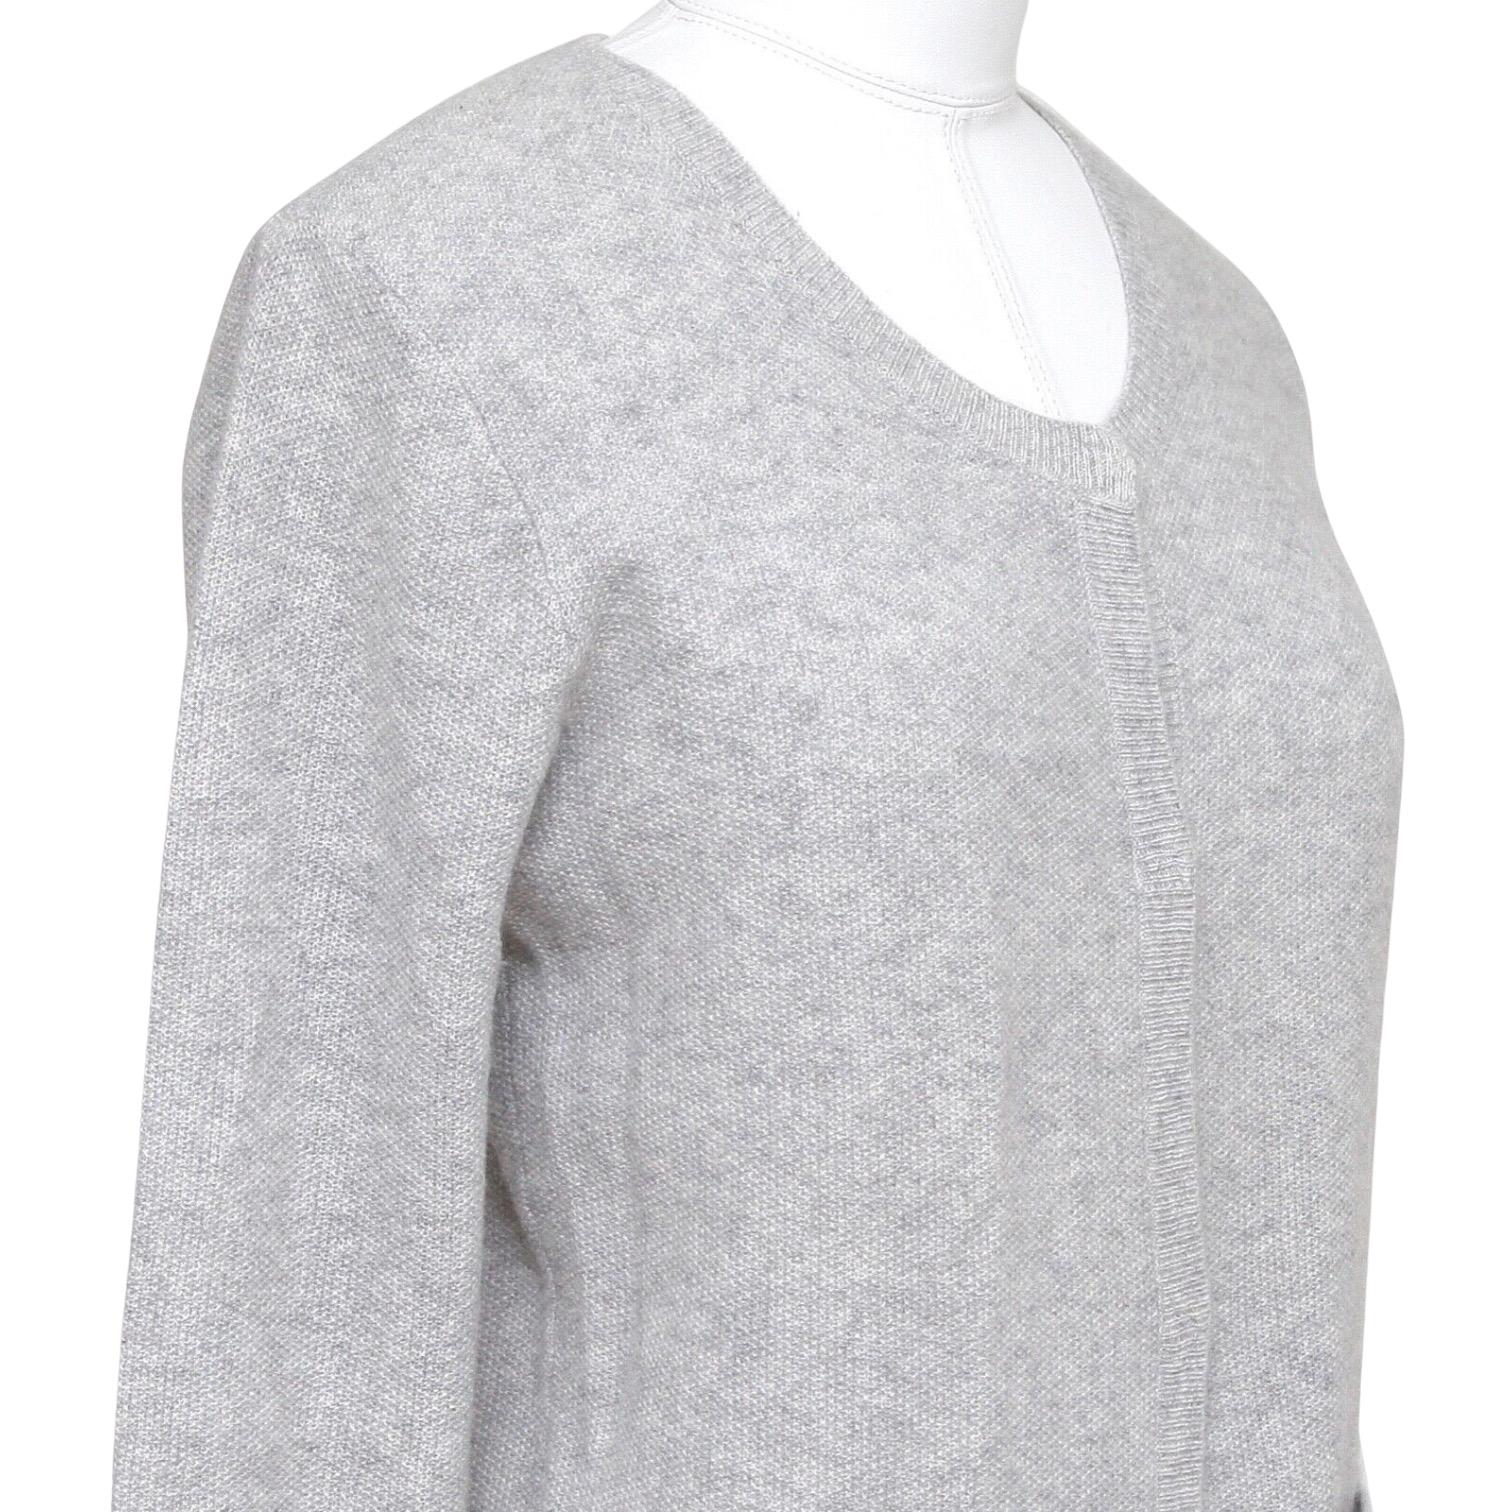 CHLOE Grey Cardigan Sweater Knit Cashmere Long Sleeve Snap Closure Sz XS For Sale 1